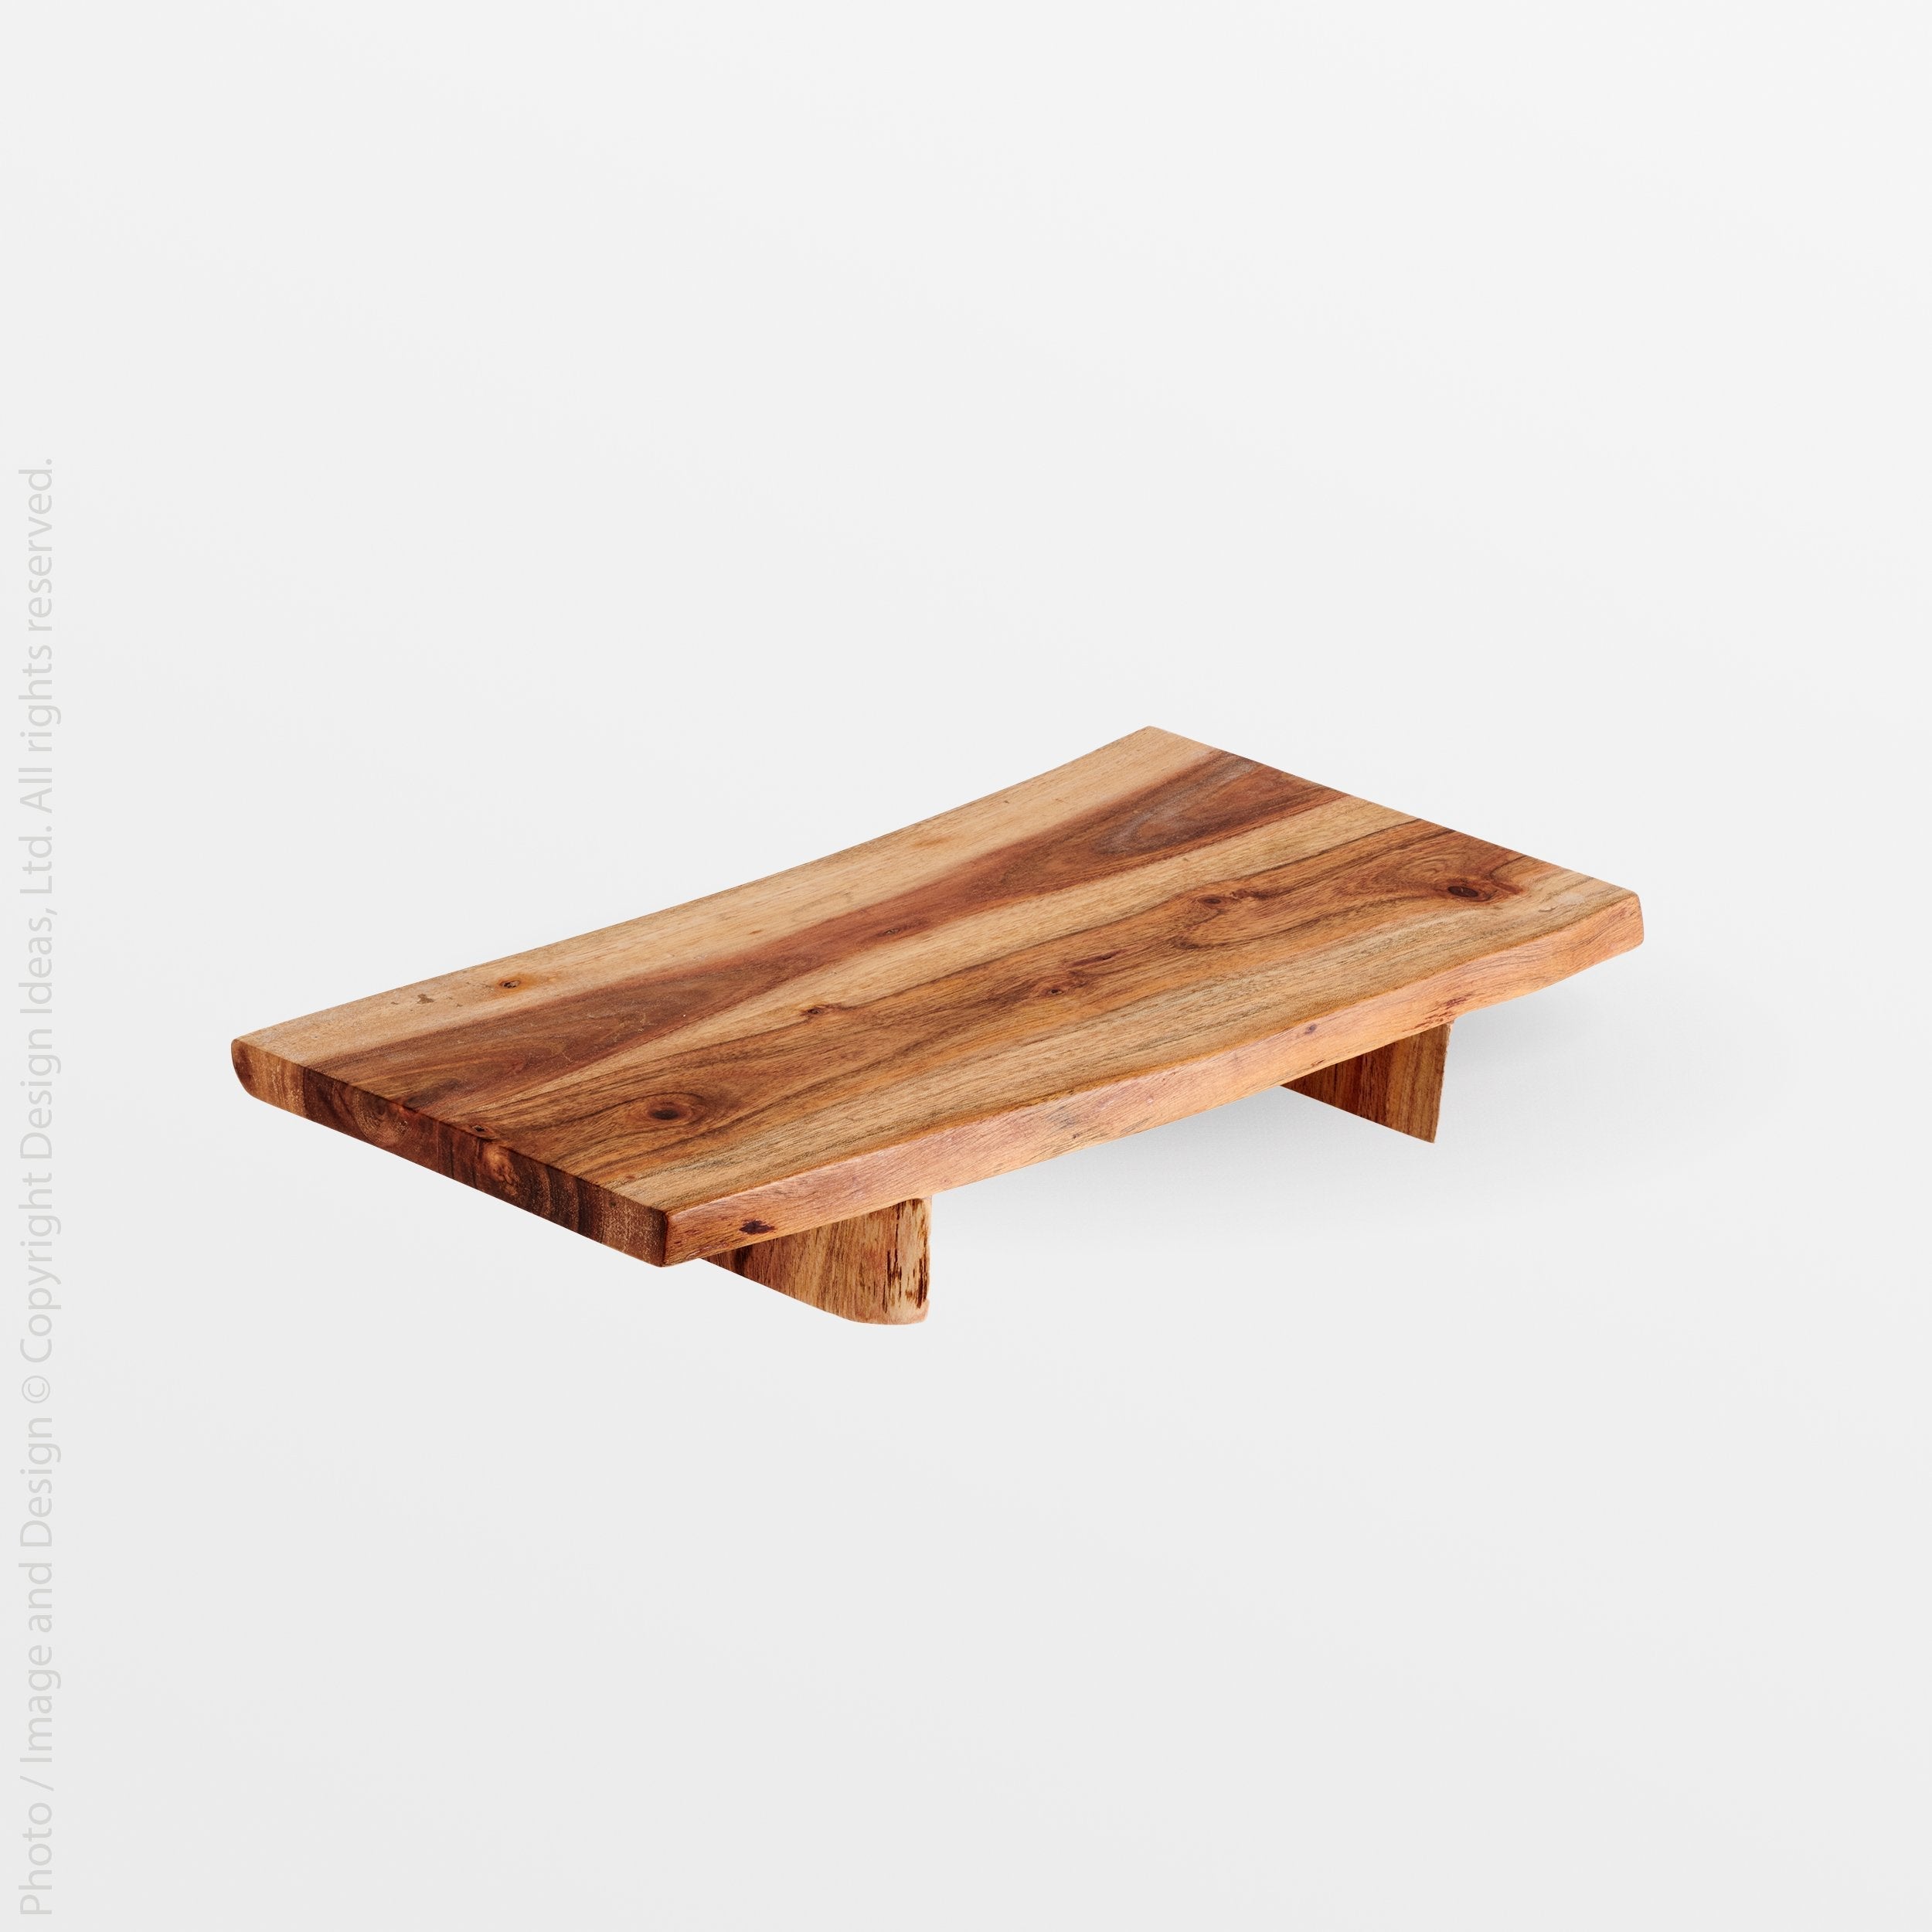 Acacia Bathtub Tray - Natural Wood Tray With Extended Sides, Glass